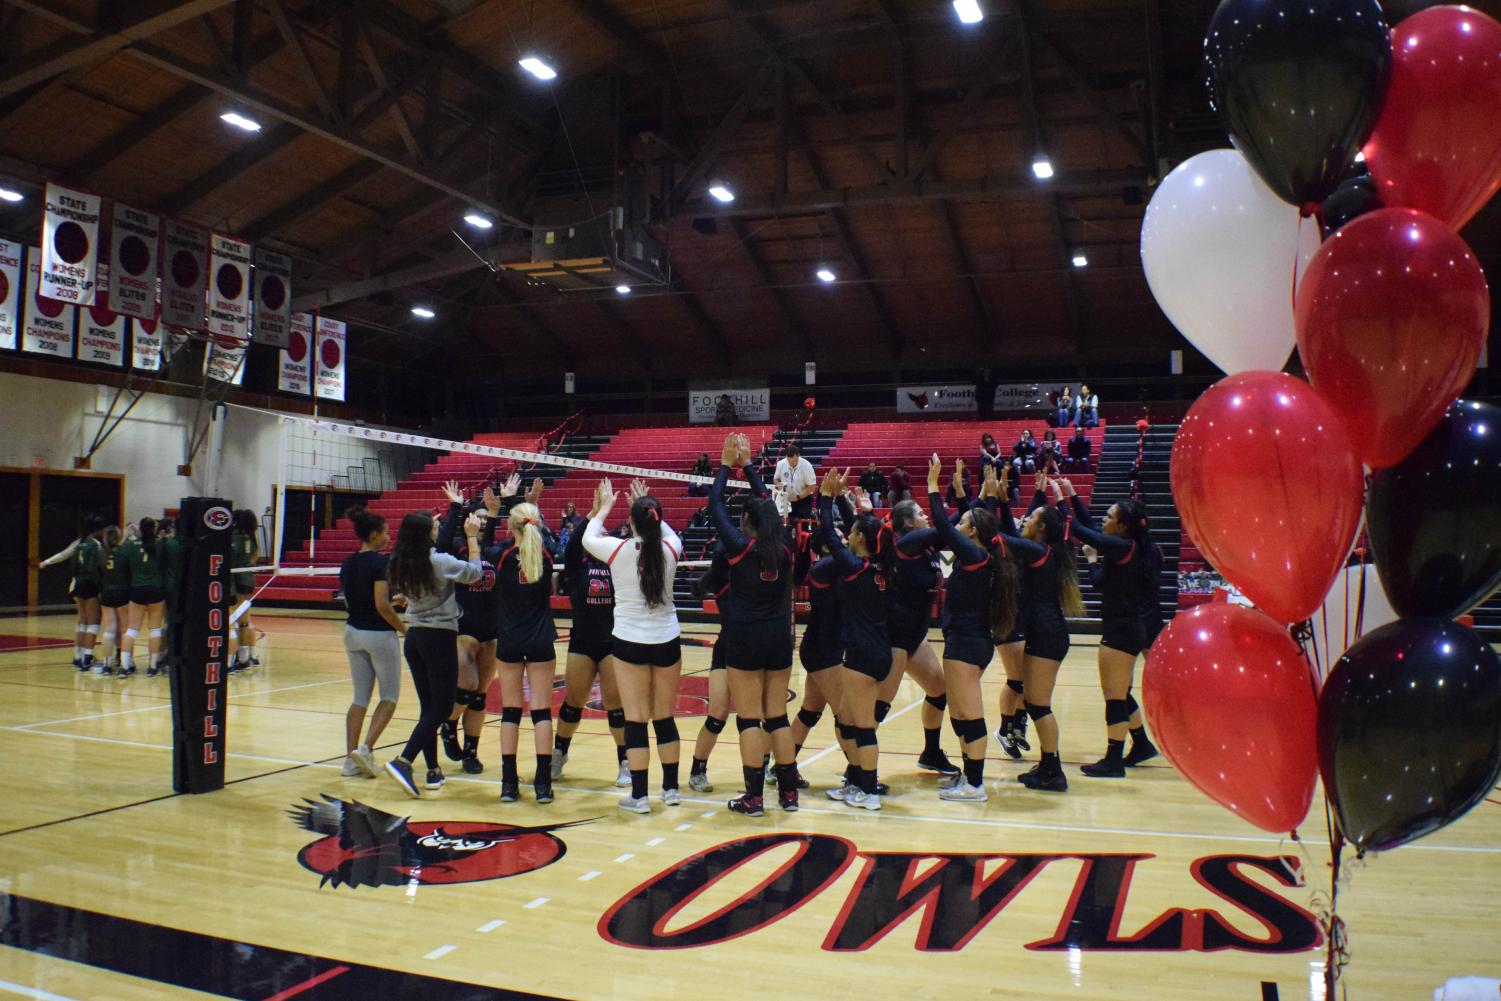 The+Foothill+Owls+volleyball+team+photographed+by+Script+staff+member+Kathy+Honcharuk%0A